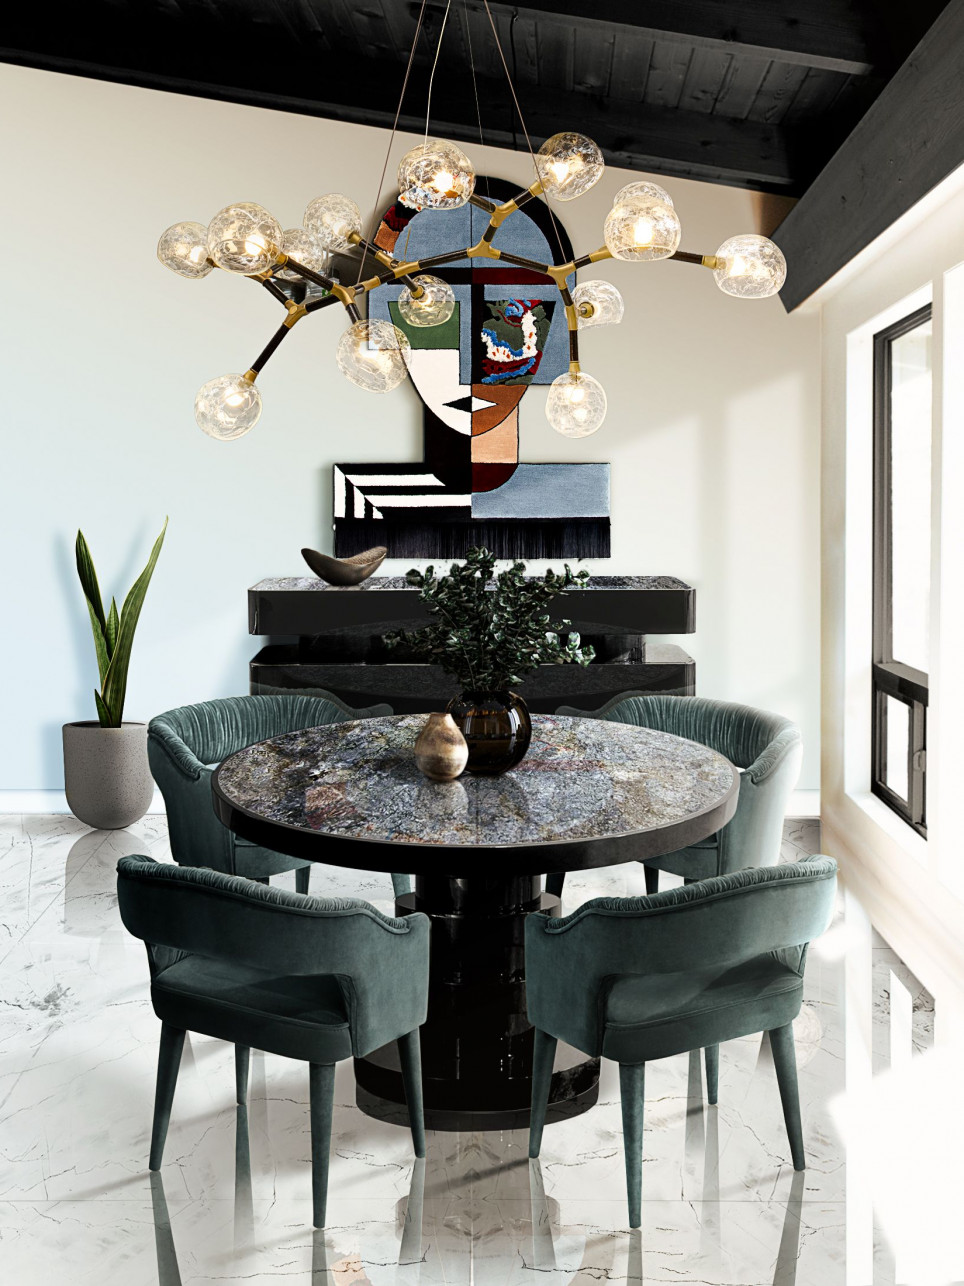 Modern dining room design with unique patterns and textures and the Shinto Round Dining Table home inspiration ideas